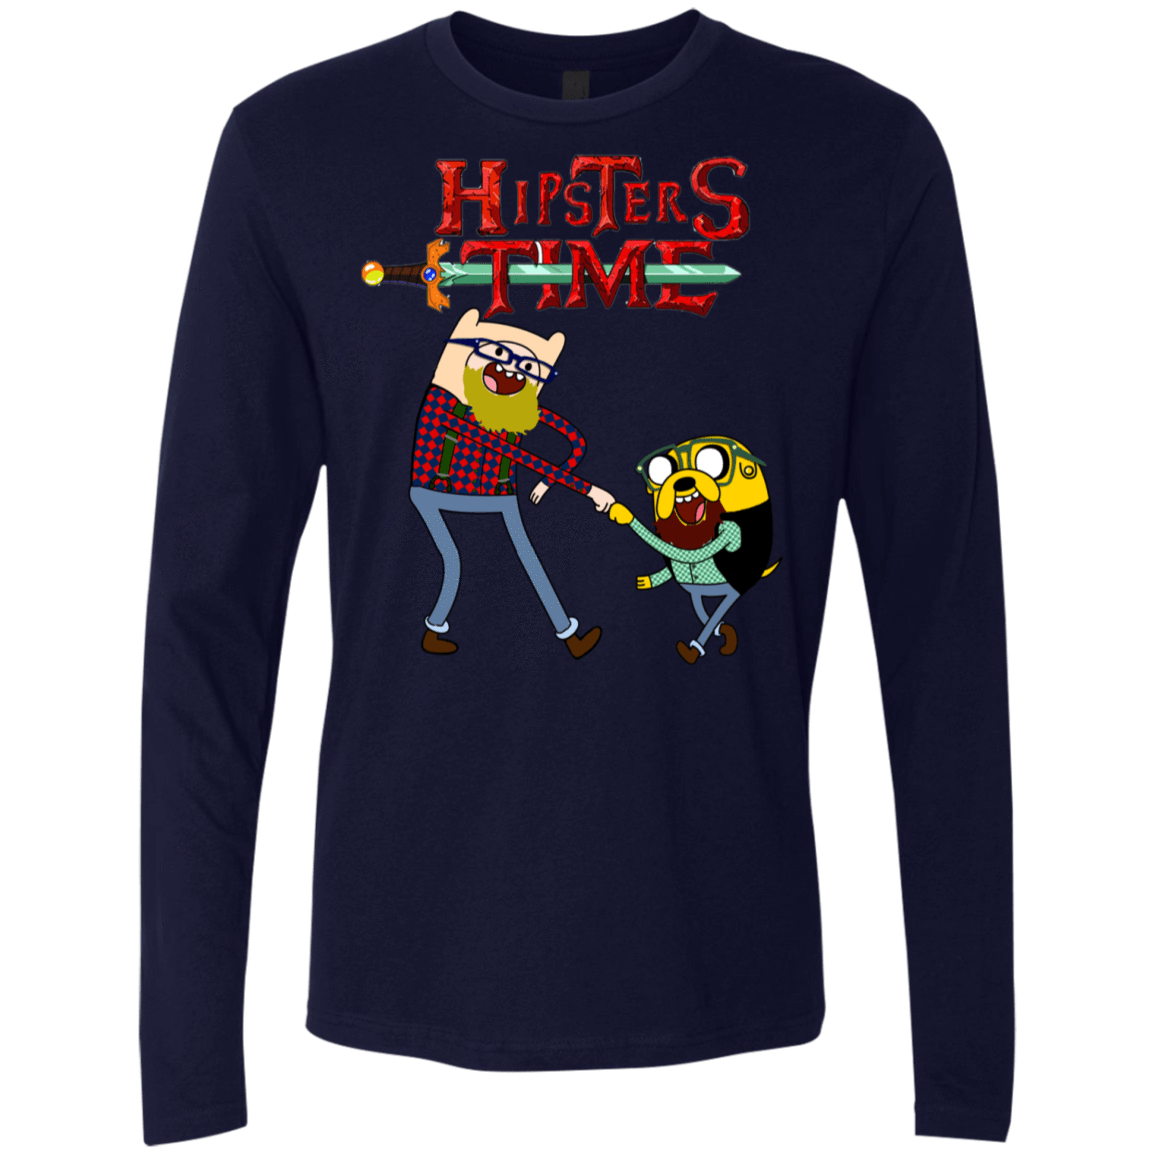 T-Shirts Midnight Navy / S Hipsters Time Men's Premium Long Sleeve